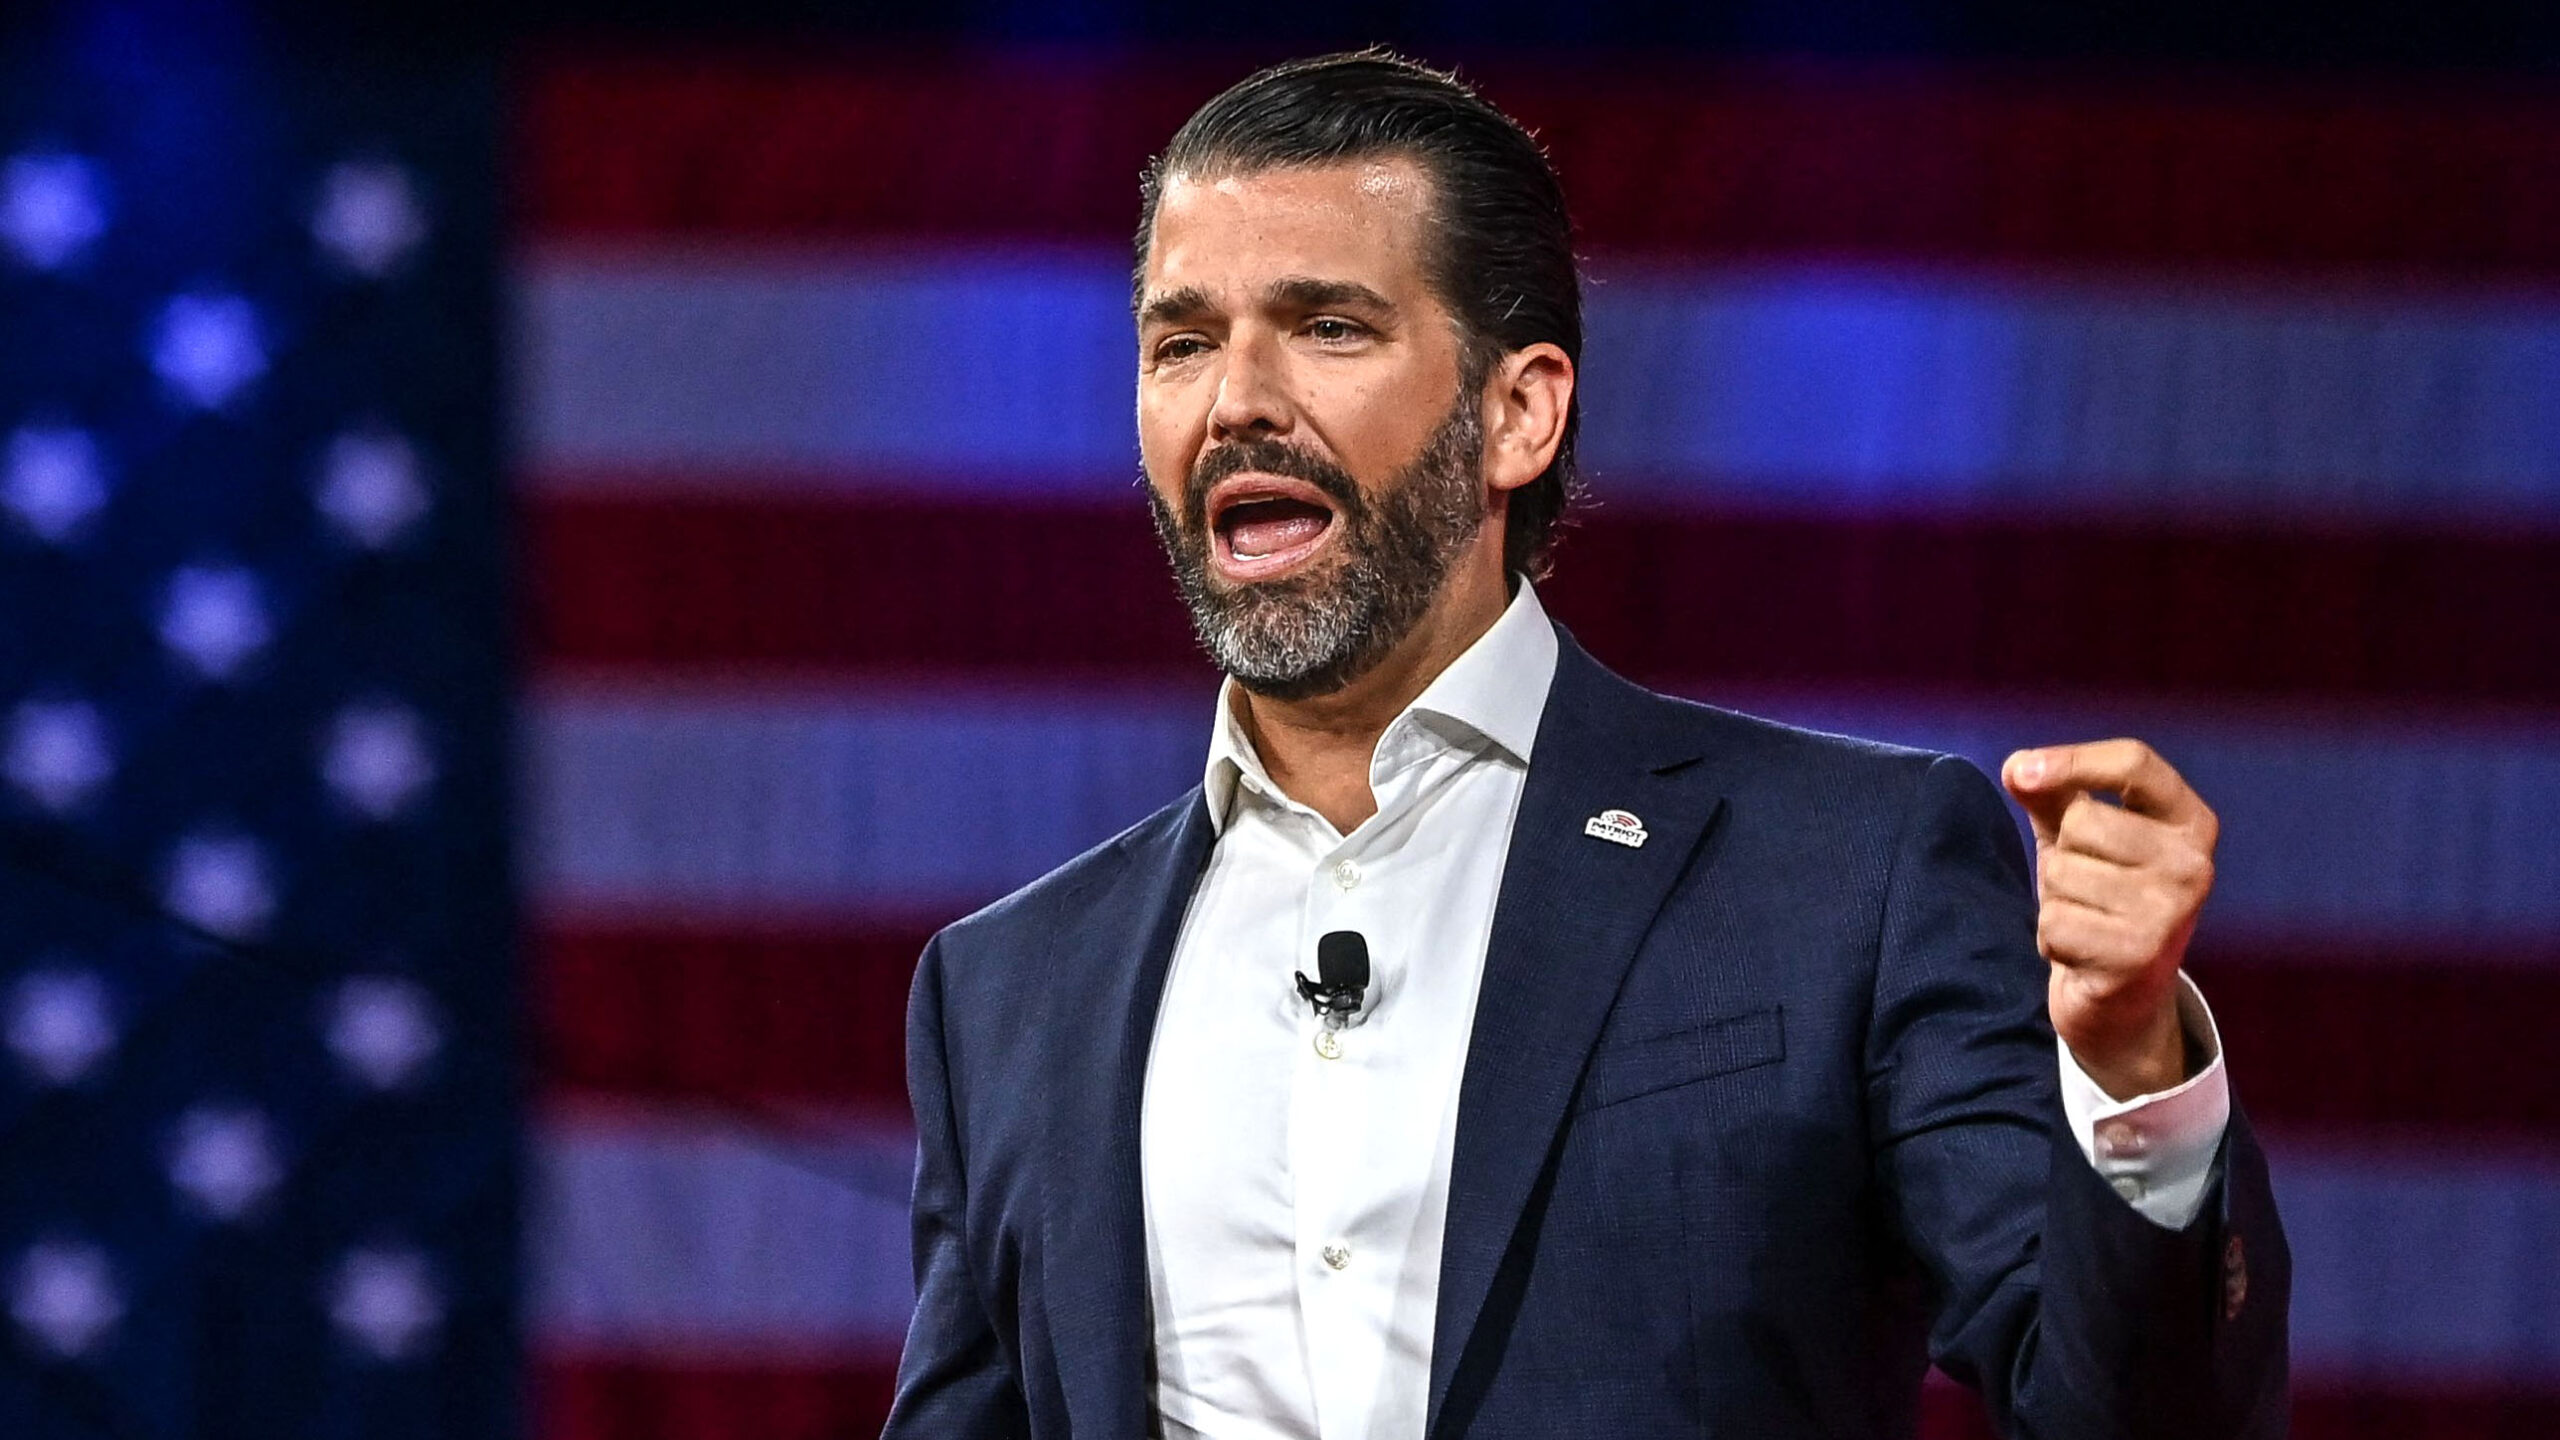 Trump Jr. Pushes Congress To Pass ‘Hardcore’ Anti-China Restrictions To Protect U.S. Citizens Online